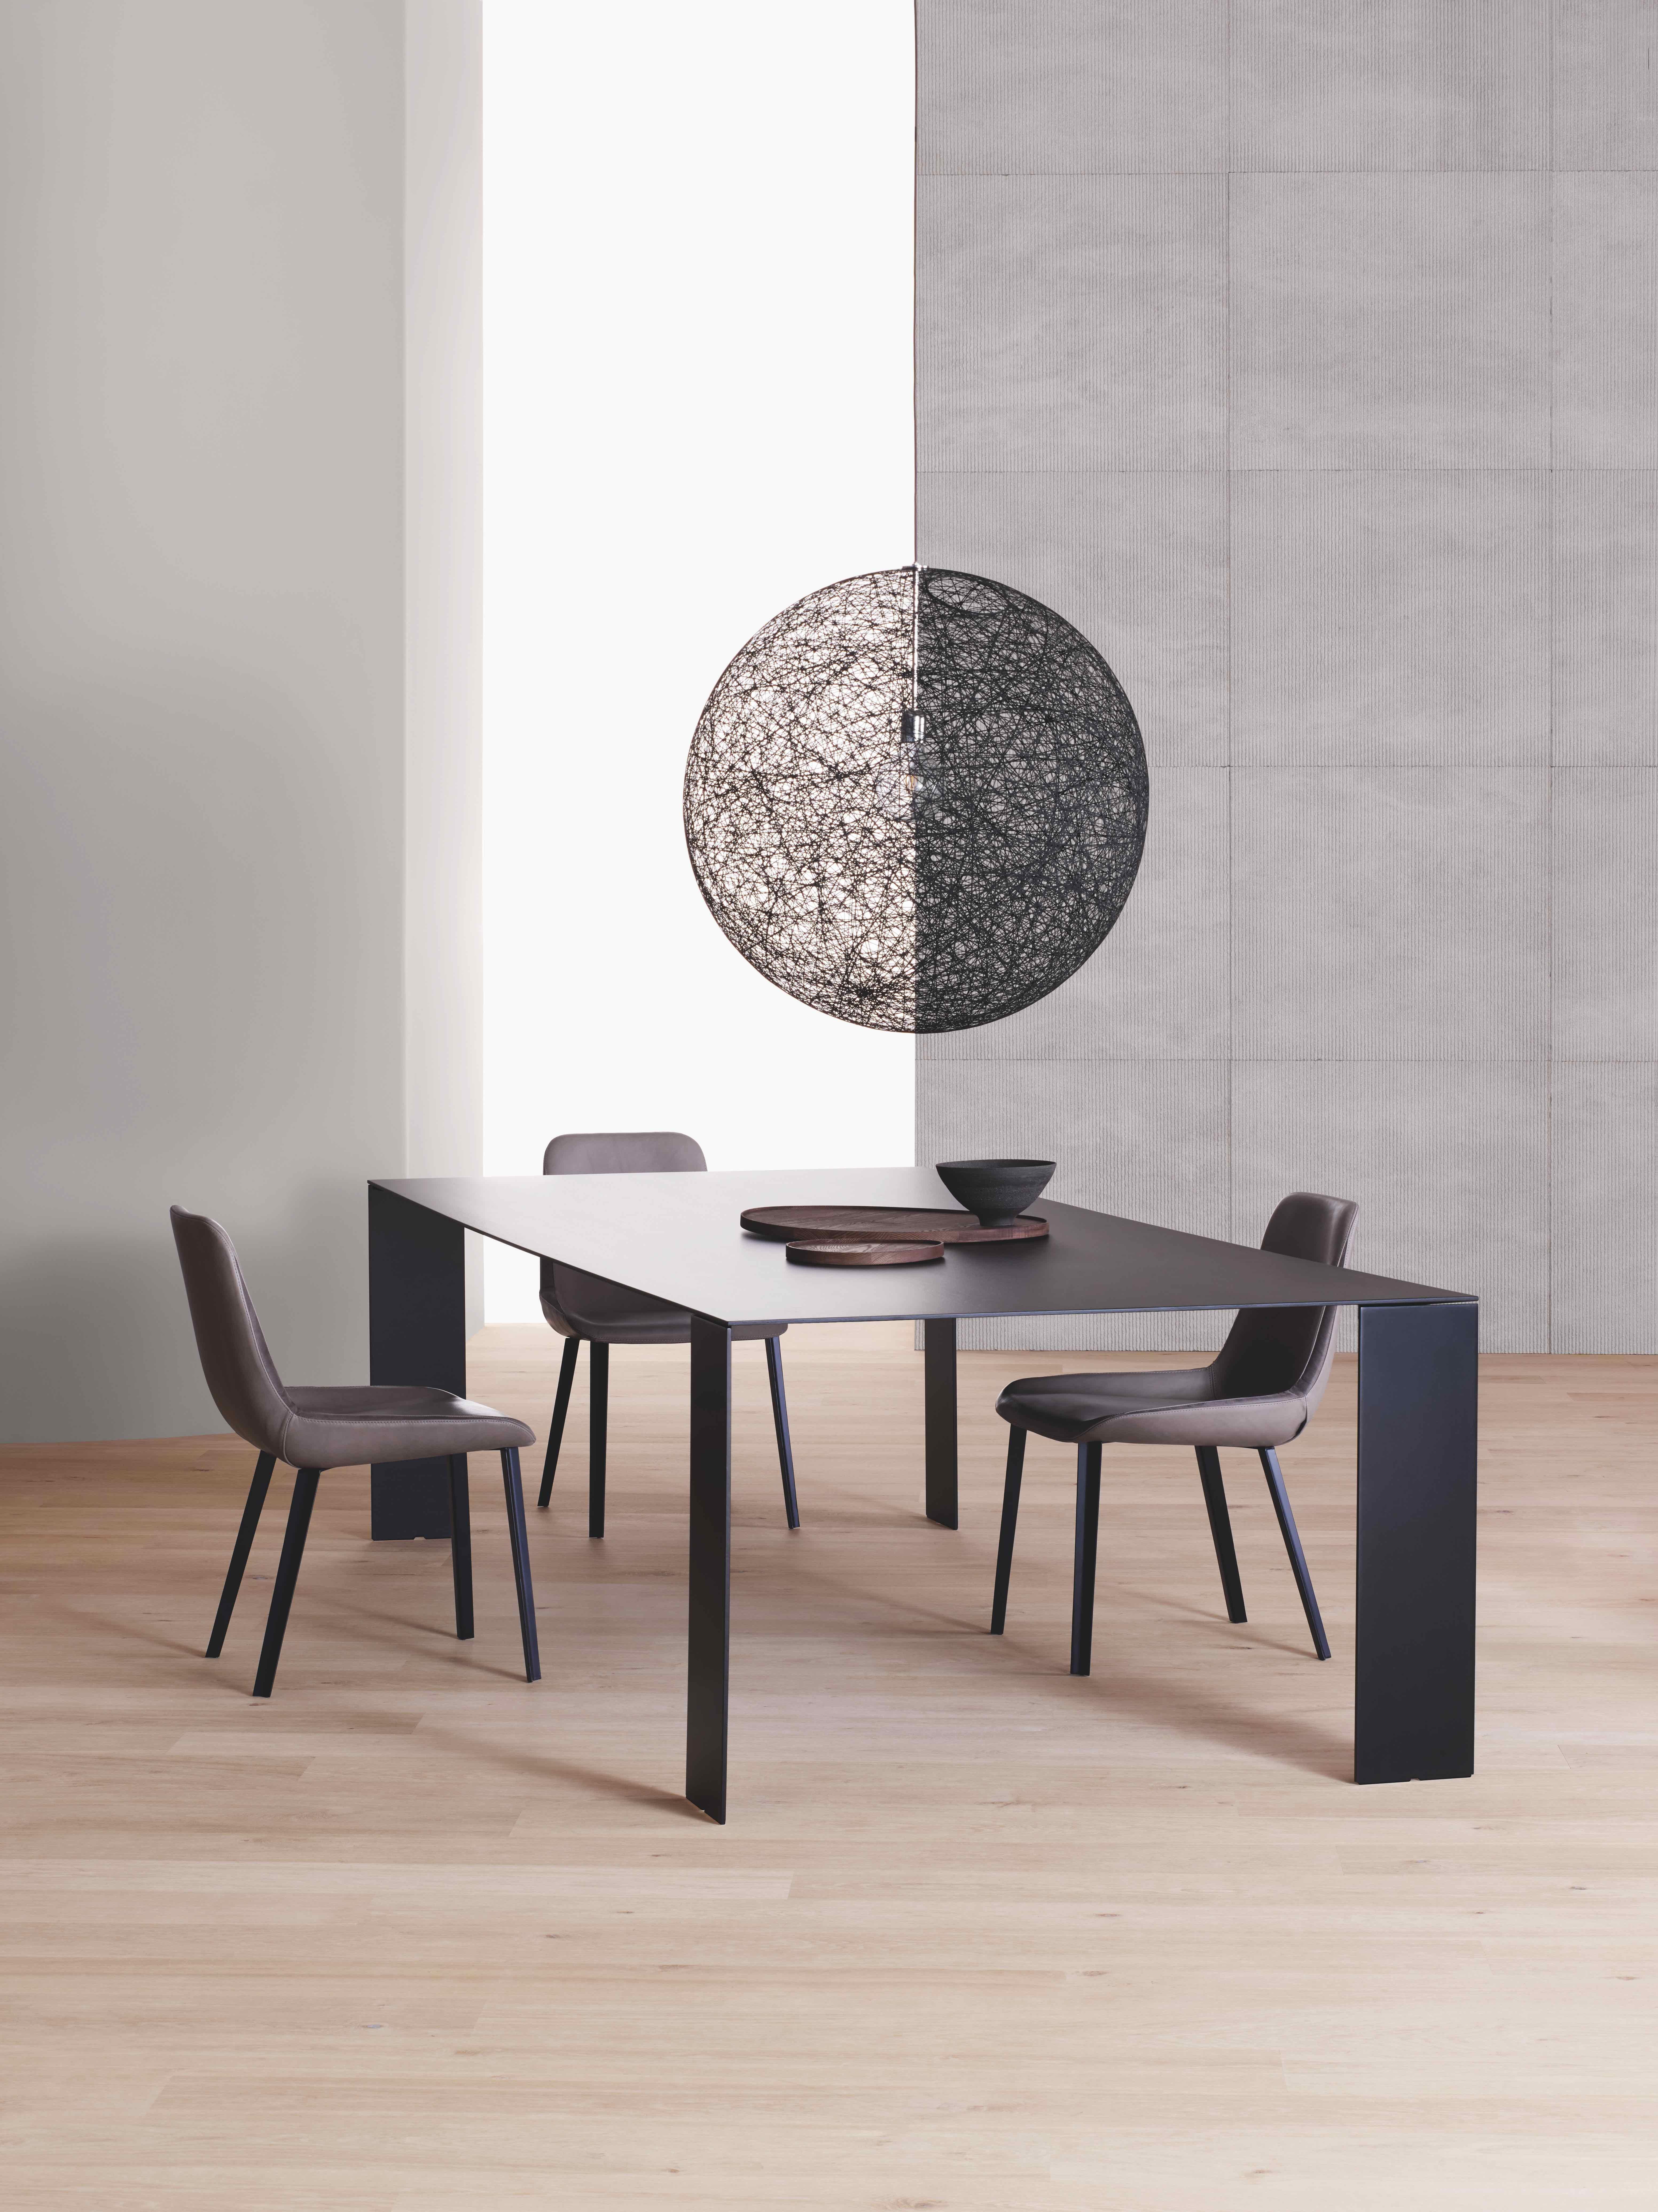 Exilis Dining Table by Amura Lab (for 8 persons)
Marbre : Emperador 
Legs in metal (satinato)

Dimensions : H. 74,5 x 200 x 100

Fragility and strength, lightness and solidity: these are the boundaries within which the Exilis tables move, with their